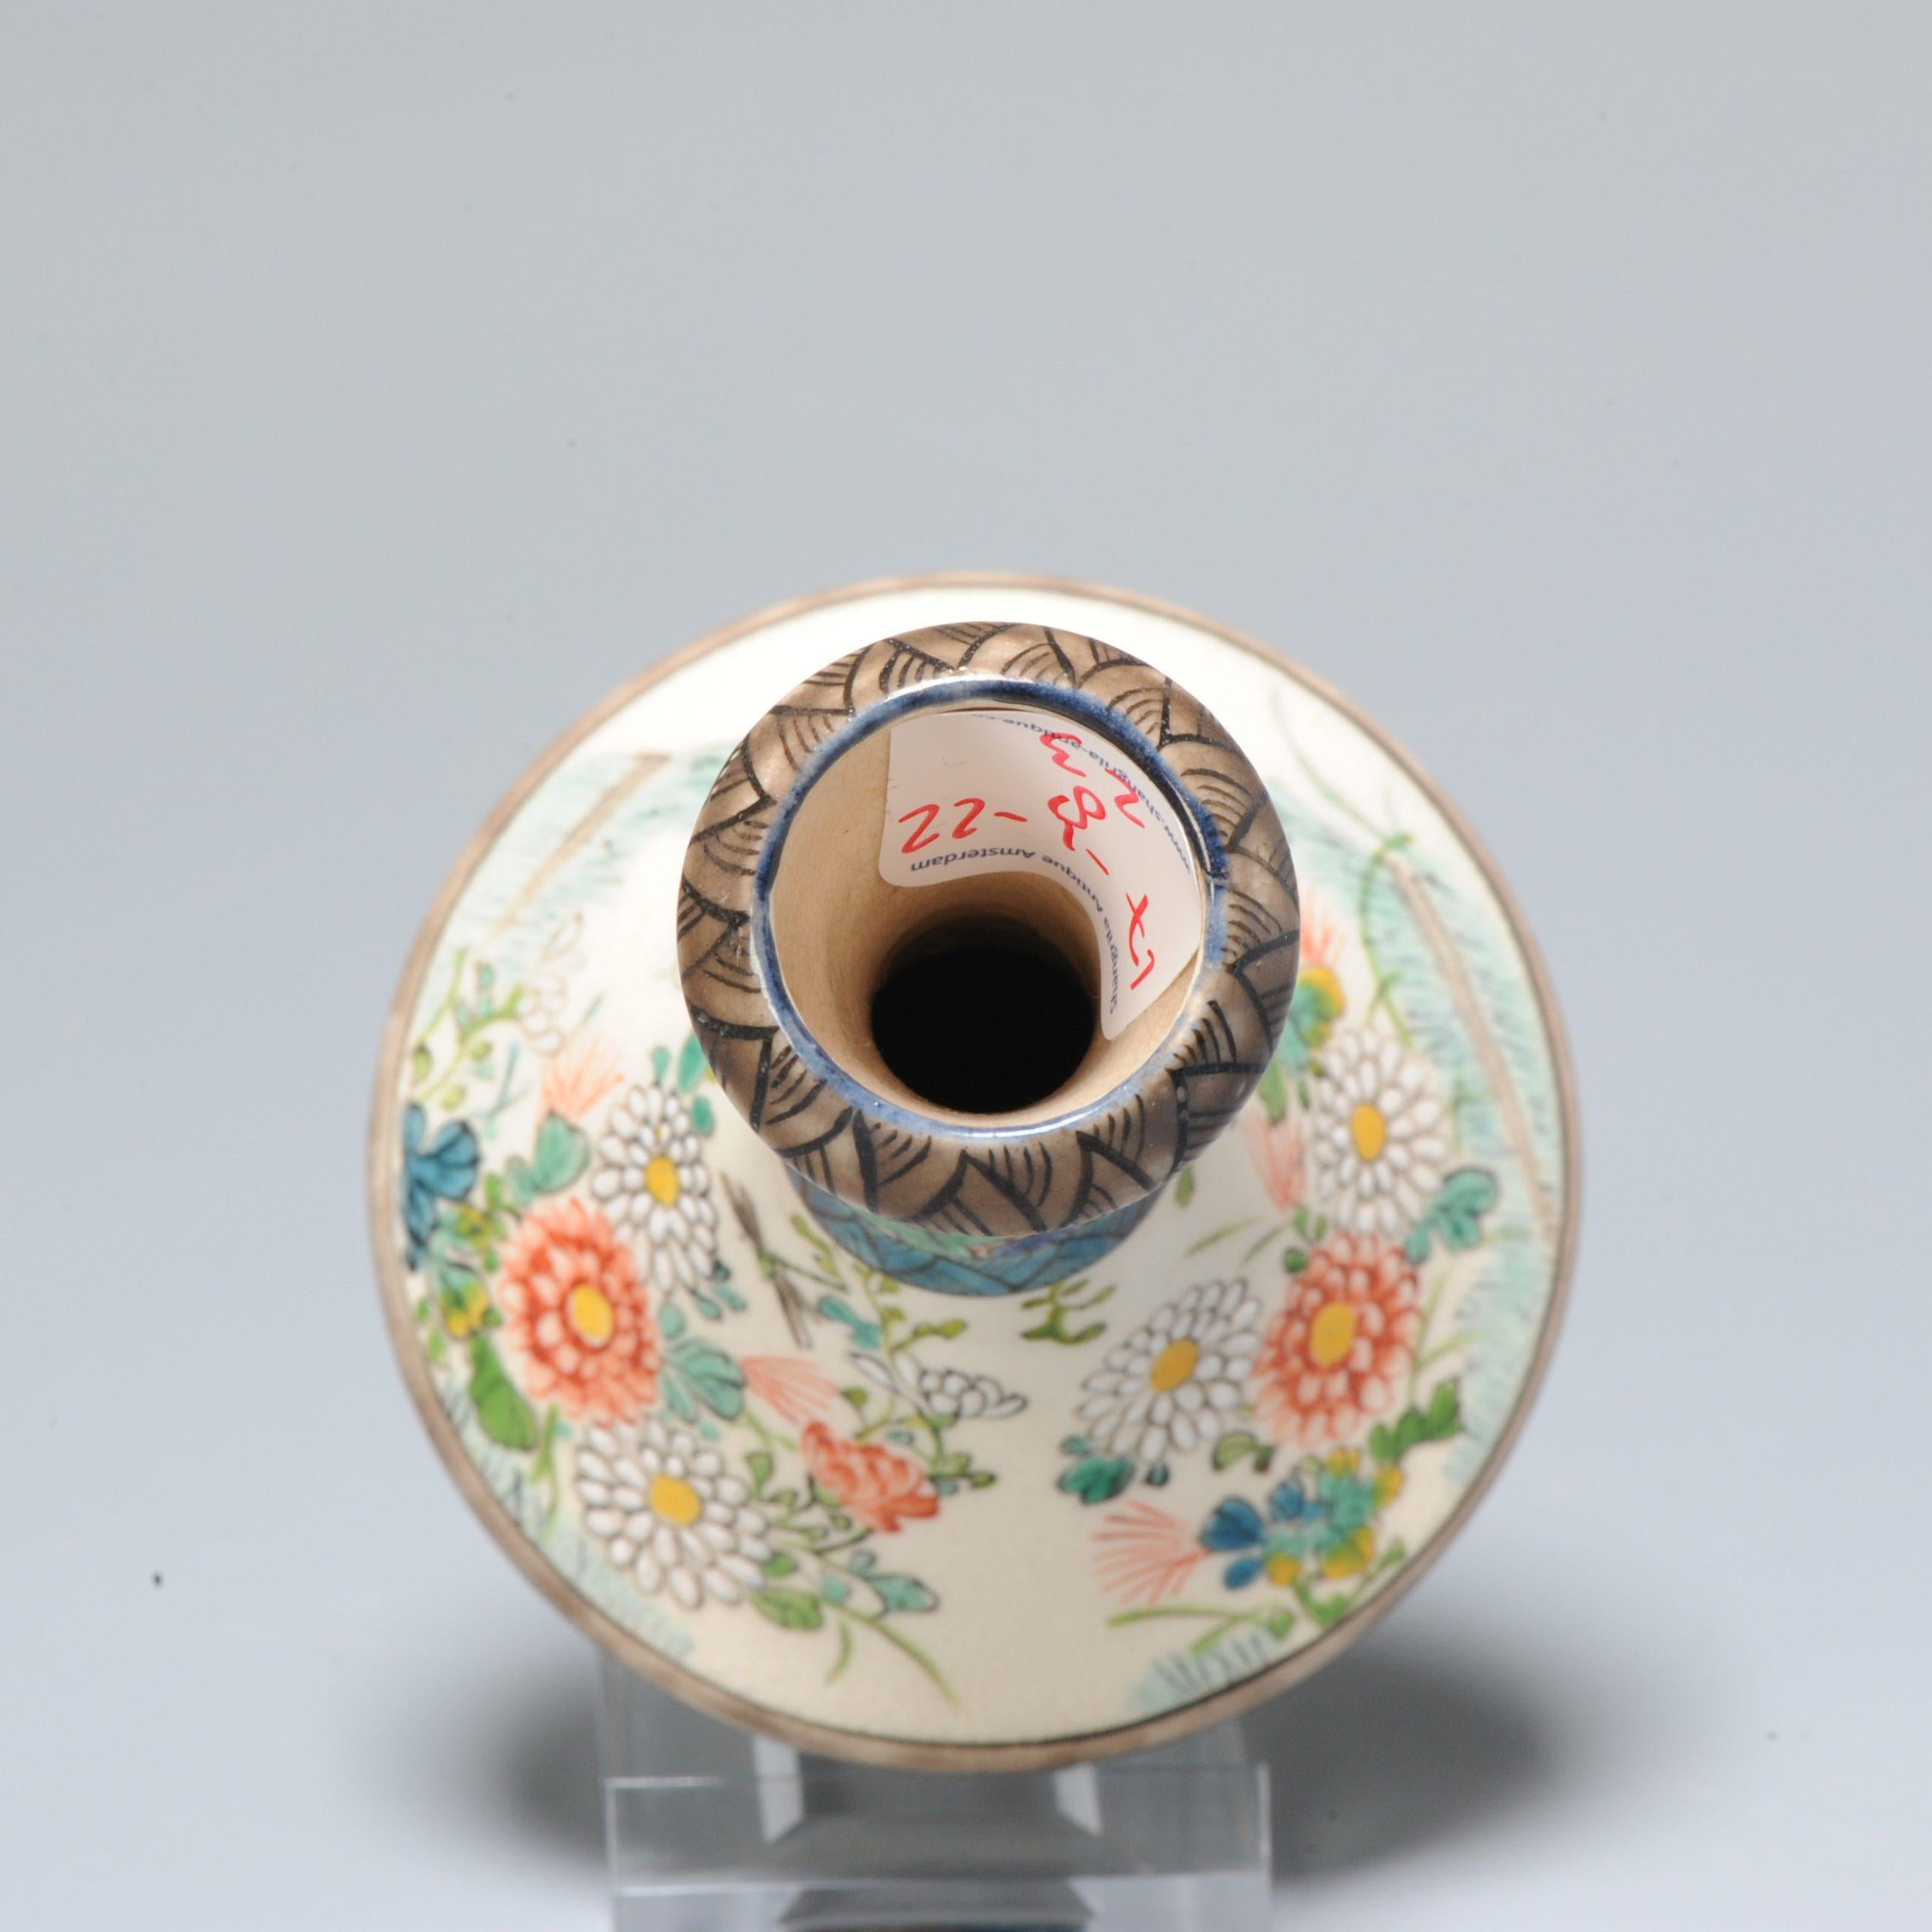 Small Antique Meiji Period Japanese Satsuma Vase Marked Chikusai In Good Condition For Sale In Amsterdam, Noord Holland